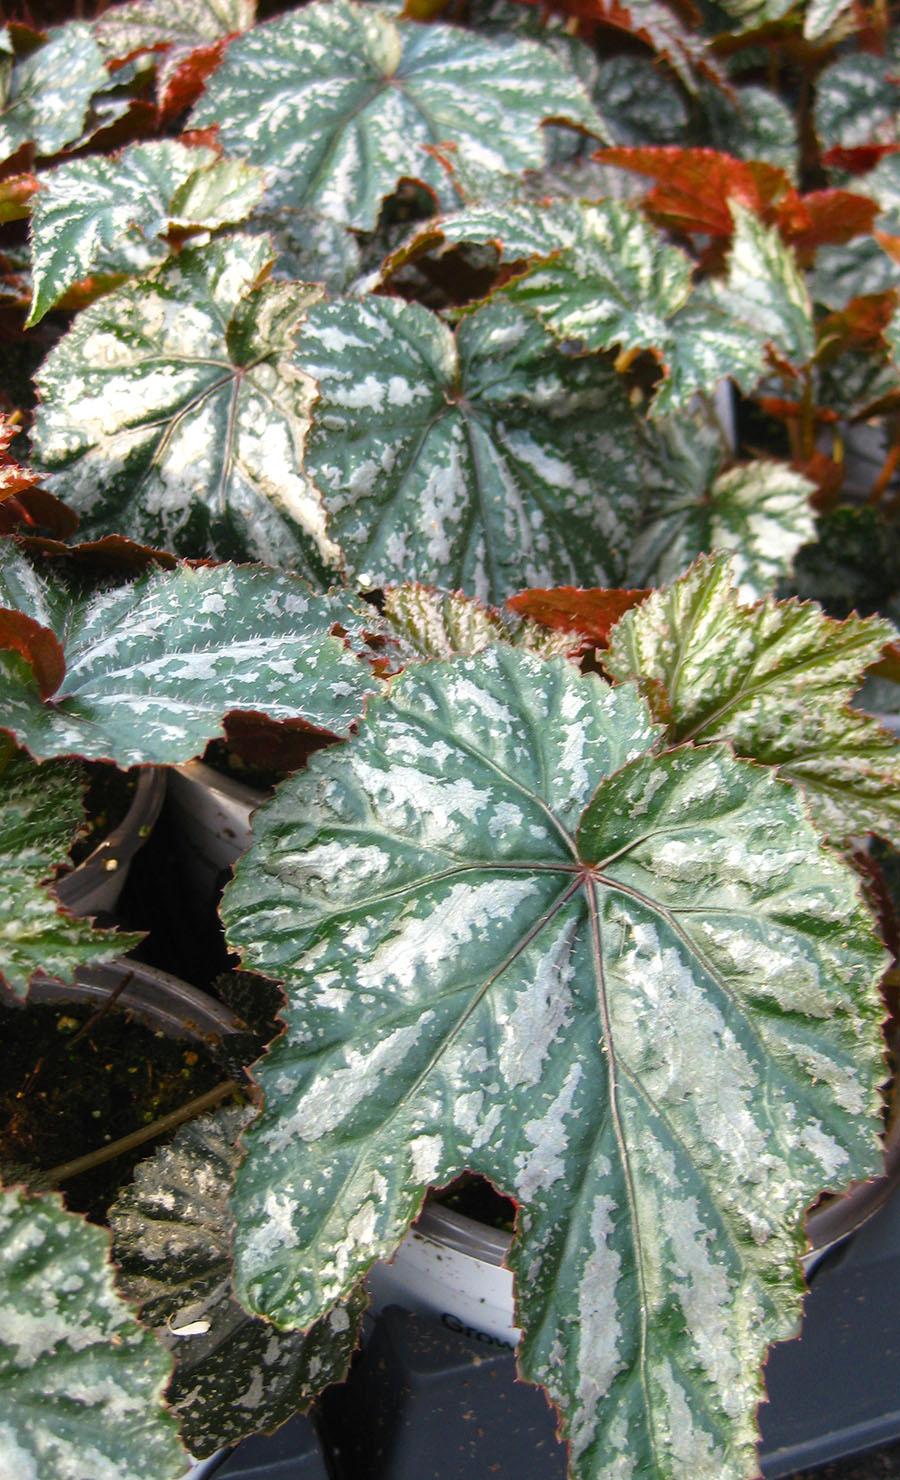 Gryphon Begonia from Hoods Gardens